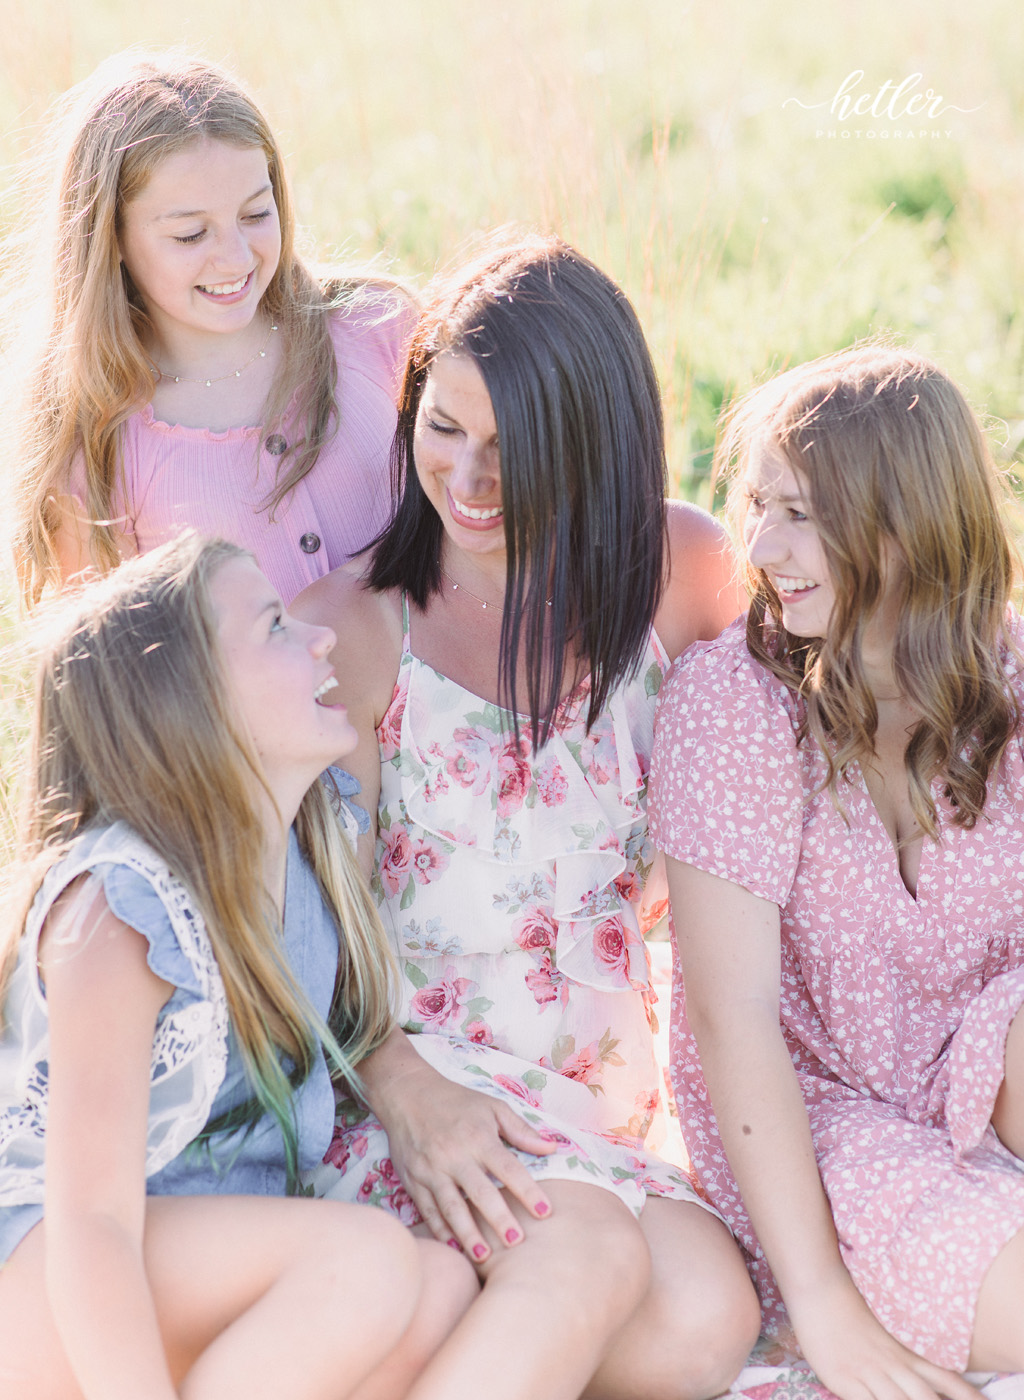 Fremont, Michigan spring family photos with the perfect family photo outfits